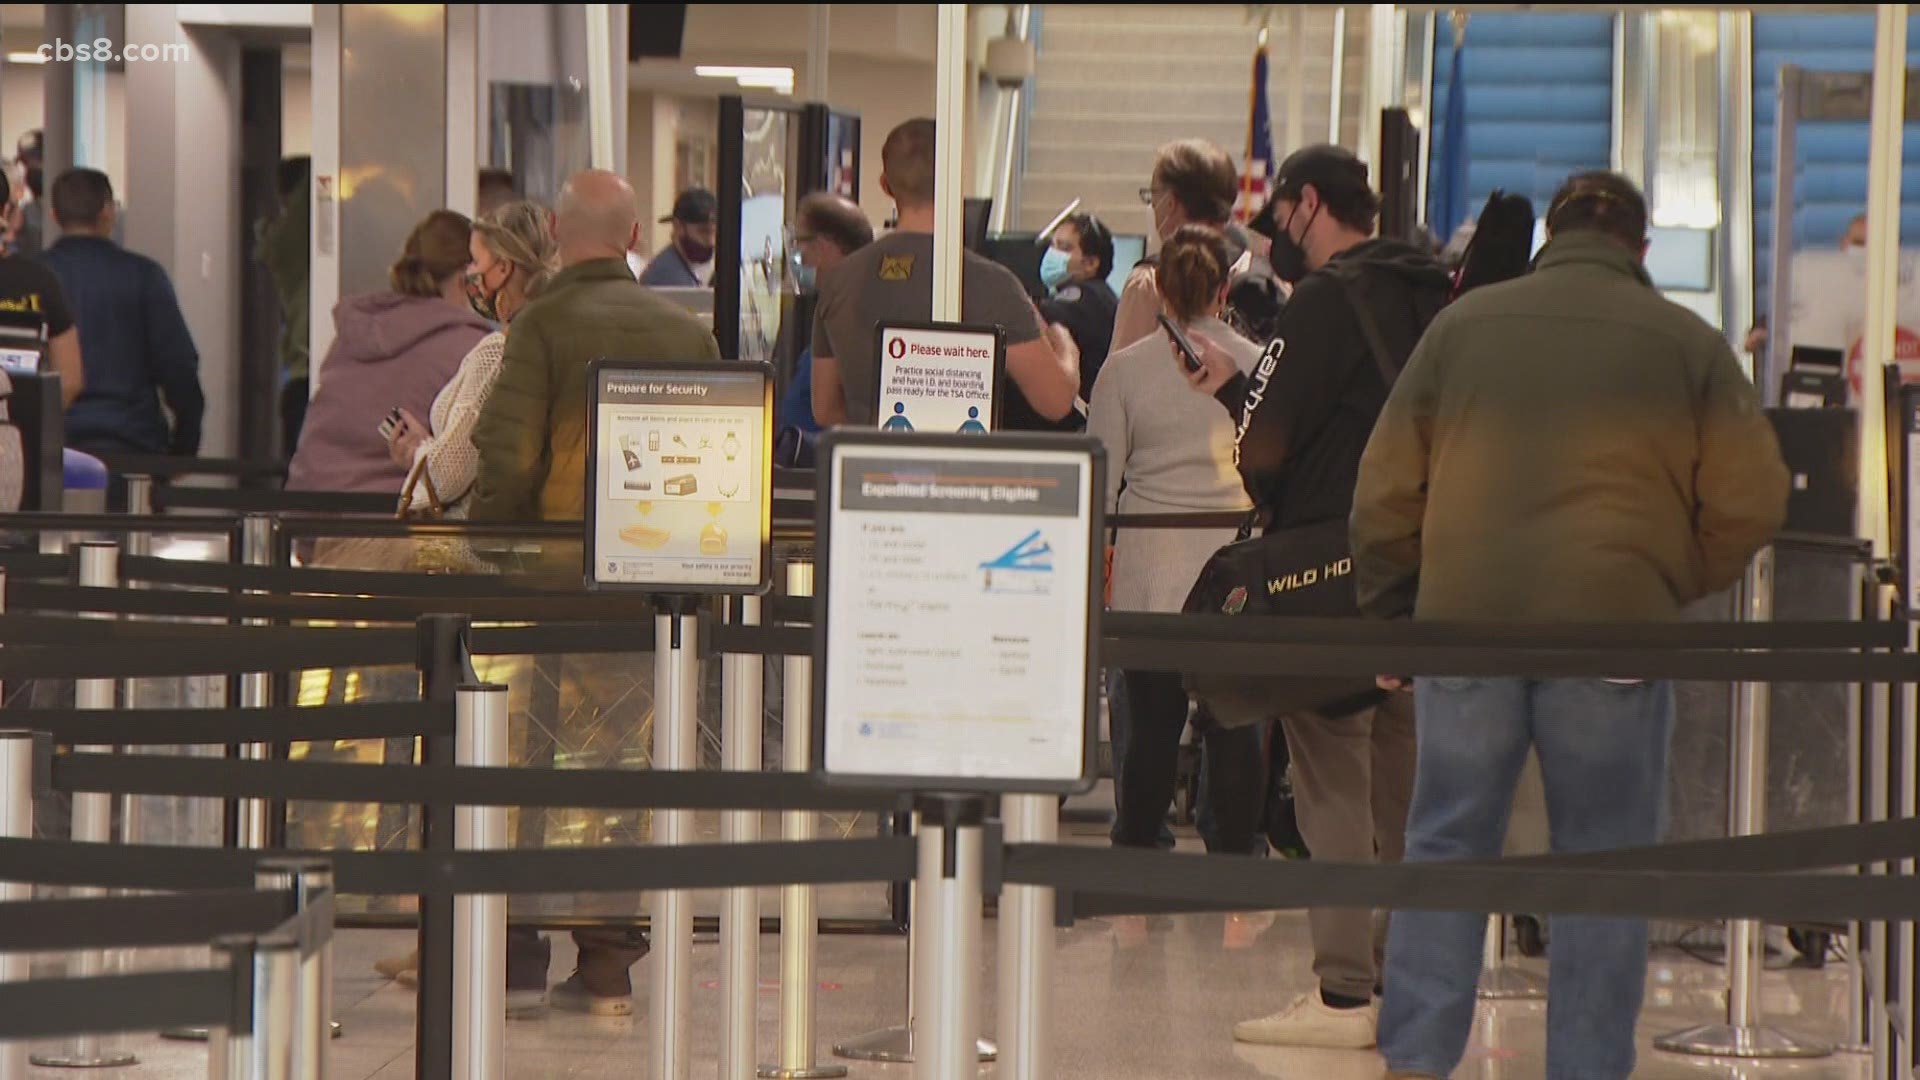 Despite the increase in COVID-19 cases across San Diego and the country, many people are still flying.